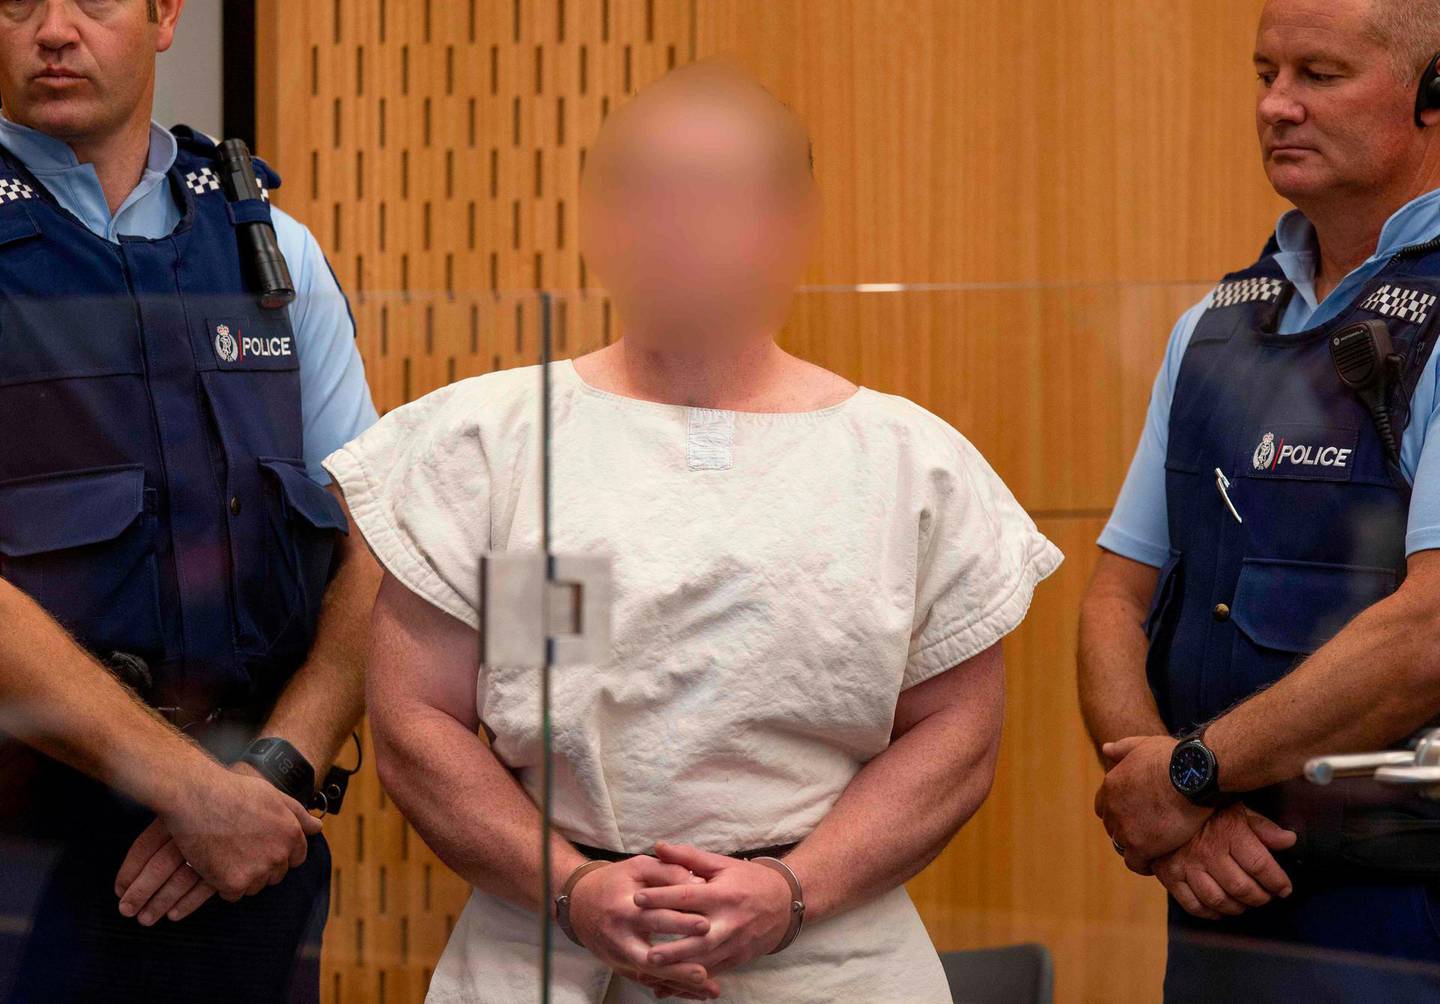 Brenton Tarrant, the man charged in relation to the Christchurch massacre appear in the dock charged with murder in the Christchurch District Court on March 16, 2019.
 A right-wing extremist who filmed himself rampaging through two mosques in the quiet New Zealand city of Christchurch killing 49 worshippers appeared in court on a murder charge March 16, 2019. Australian-born 28-year-old Brenton Tarrant appeared in the dock wearing handcuffs and a white prison shirt, sitting impassively as the judge read a single murder charge against him. A raft of further charges are expected. - --EDS NOTE HIS FACE MUST BE PIXELATED..ONLY HIS FACE--
 
 / AFP / POOL / Mark Mitchell / --EDS NOTE HIS FACE MUST BE PIXELATED..ONLY HIS FACE--
 
